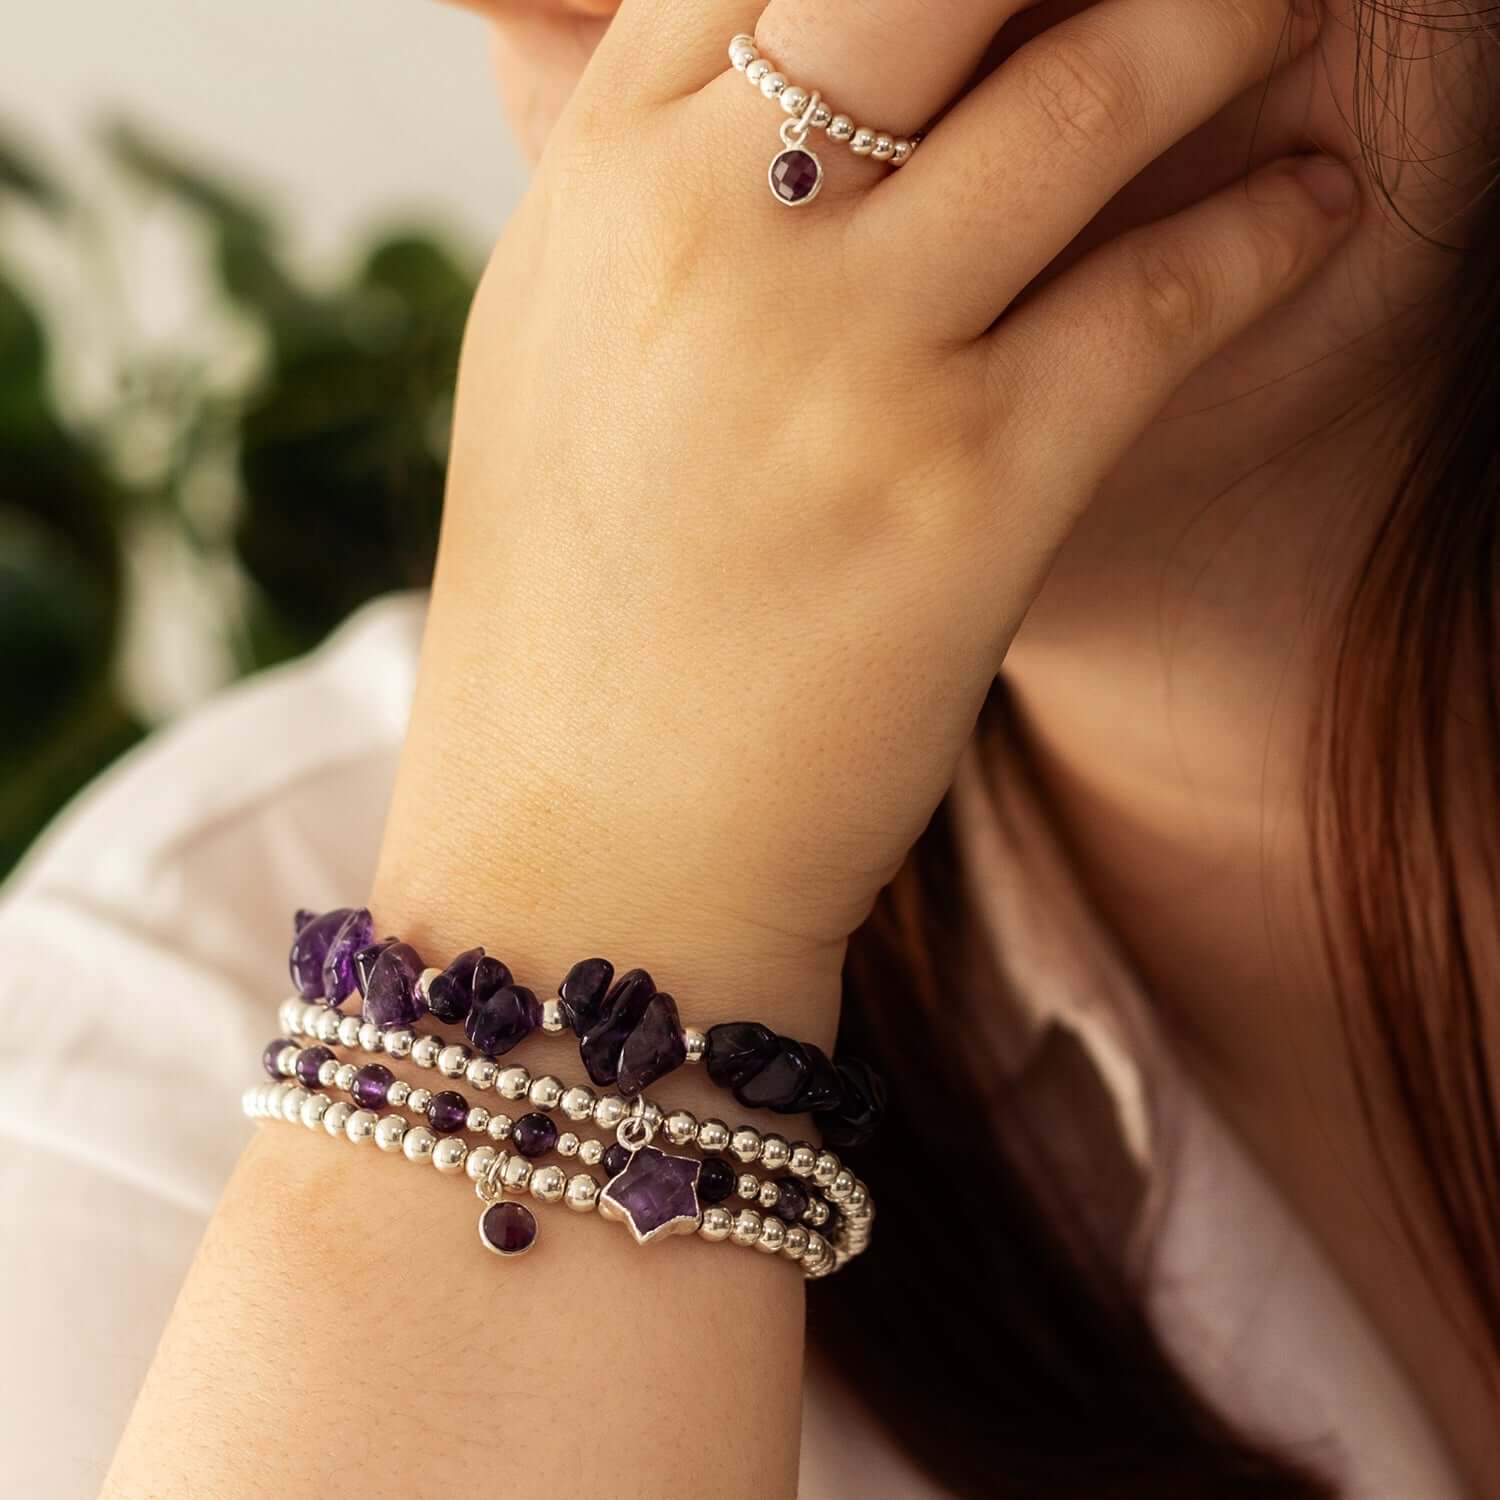 A close-up of a person wearing a silver ring with February birthstone jewellery, a purple gemstone, and a matching set of beaded bracelets with purple and silver beads. The person’s hand is near their face, against a backdrop of lush greenery